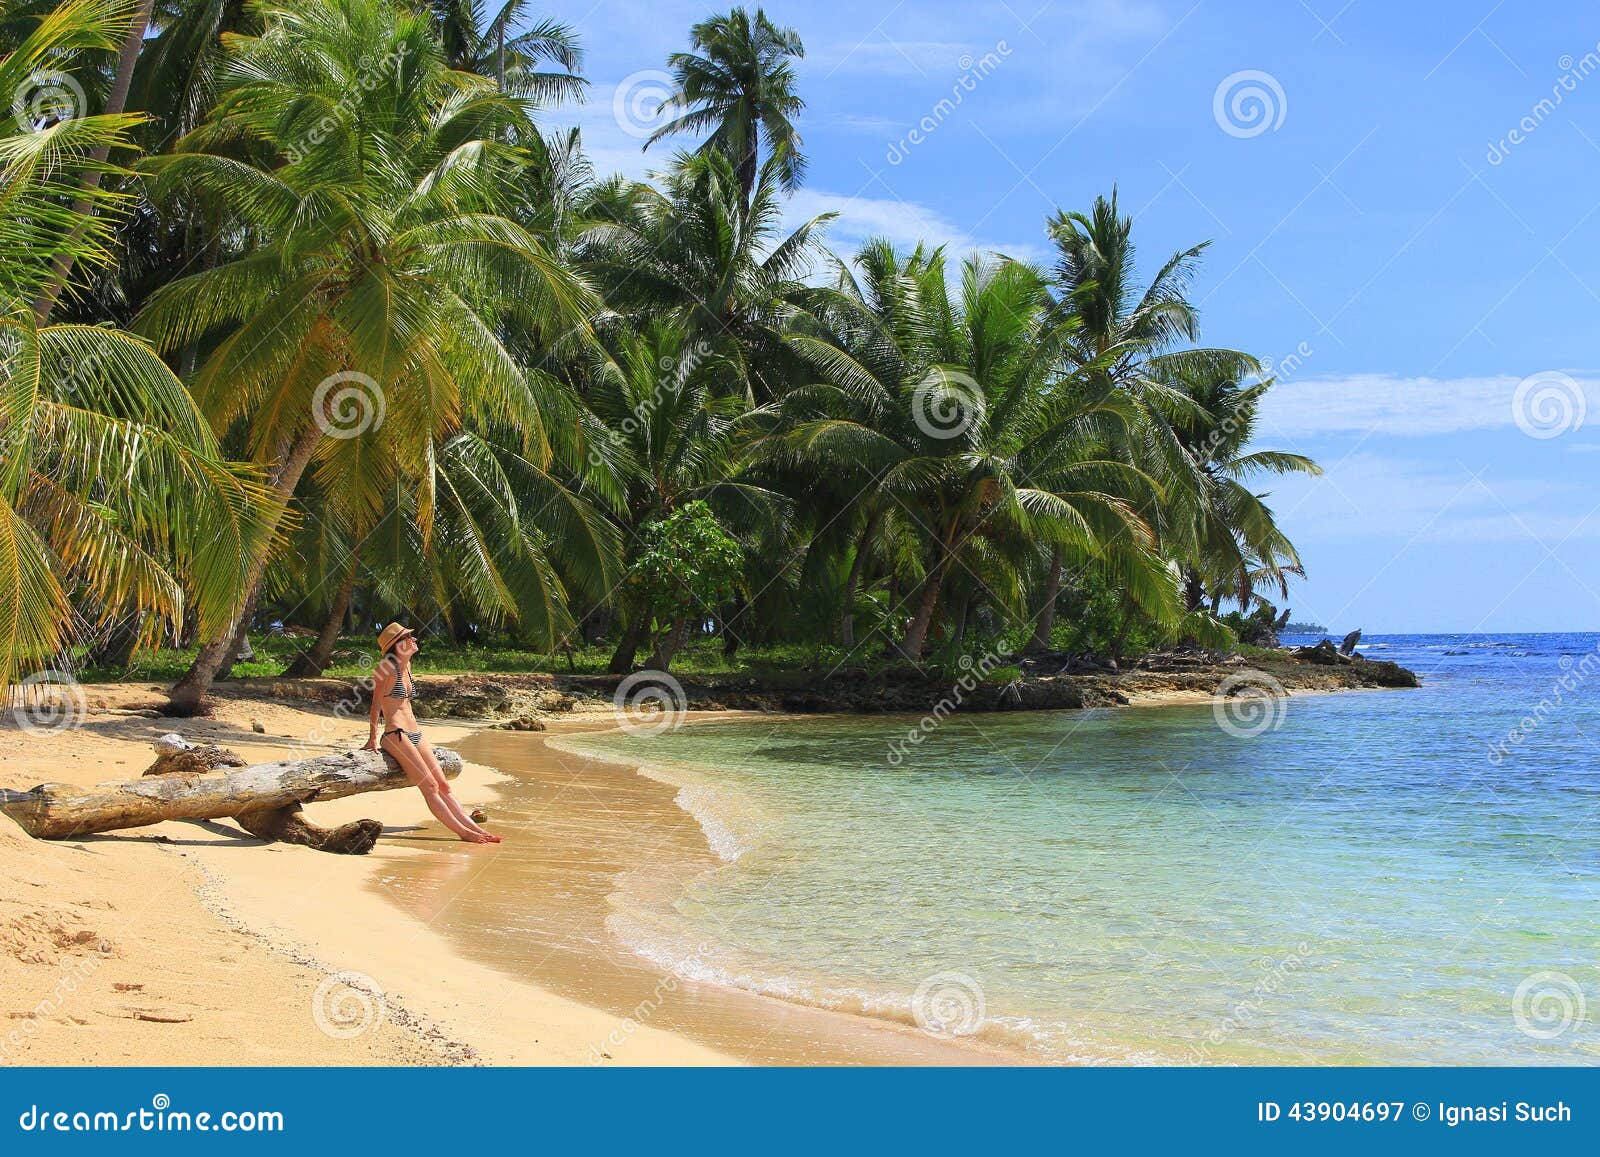 young beautiful woman enjoying her time and resting close to the sea